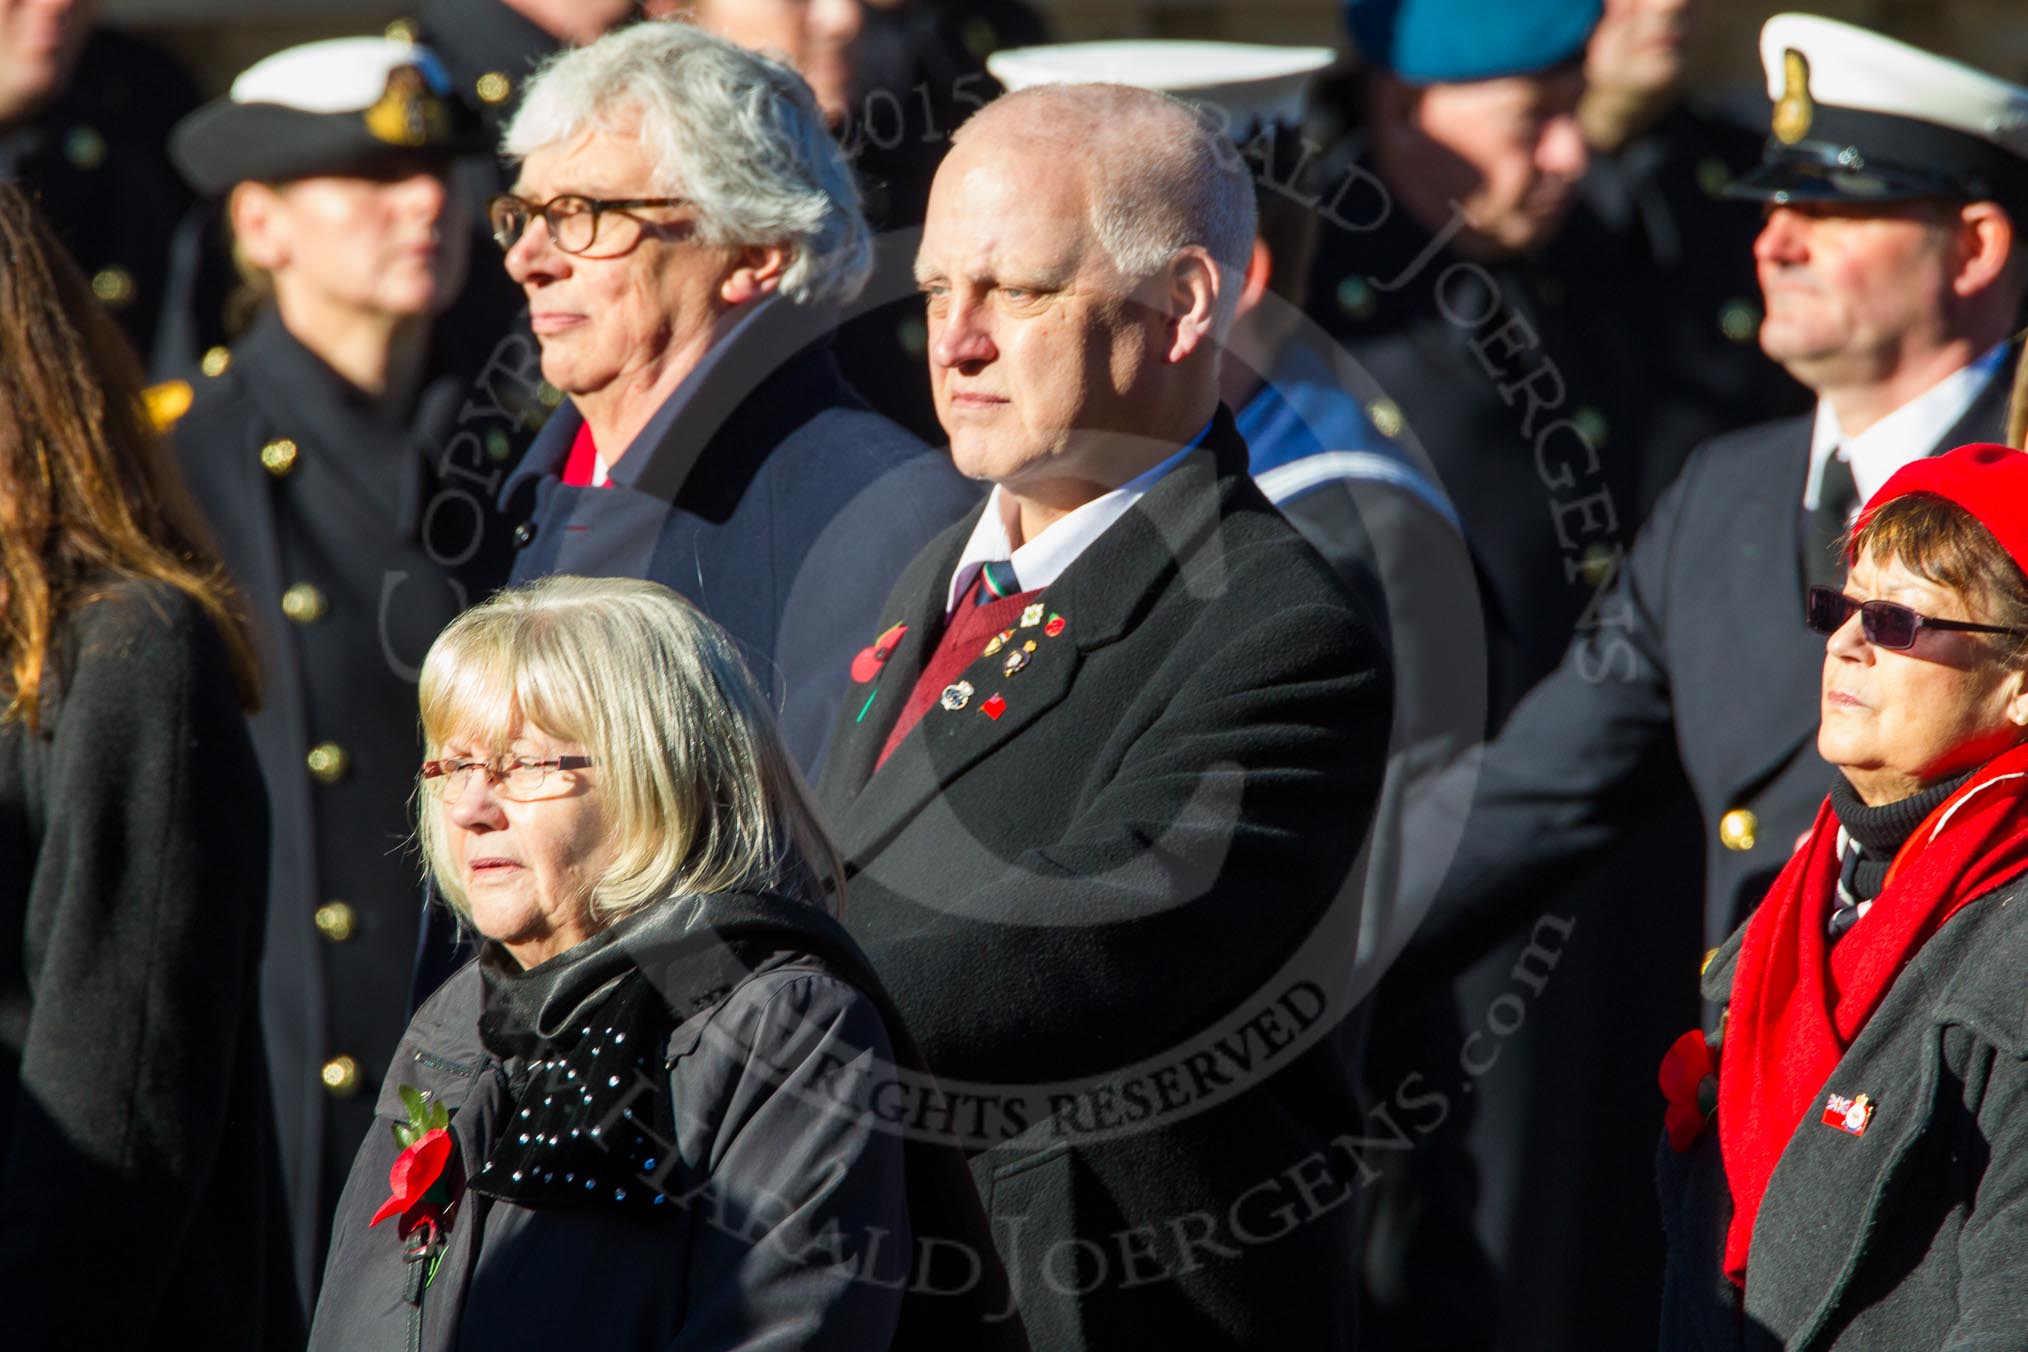 Remembrance Sunday Cenotaph March Past 2013: E1 - Merchant Navy Association..
Press stand opposite the Foreign Office building, Whitehall, London SW1,
London,
Greater London,
United Kingdom,
on 10 November 2013 at 11:44, image #346